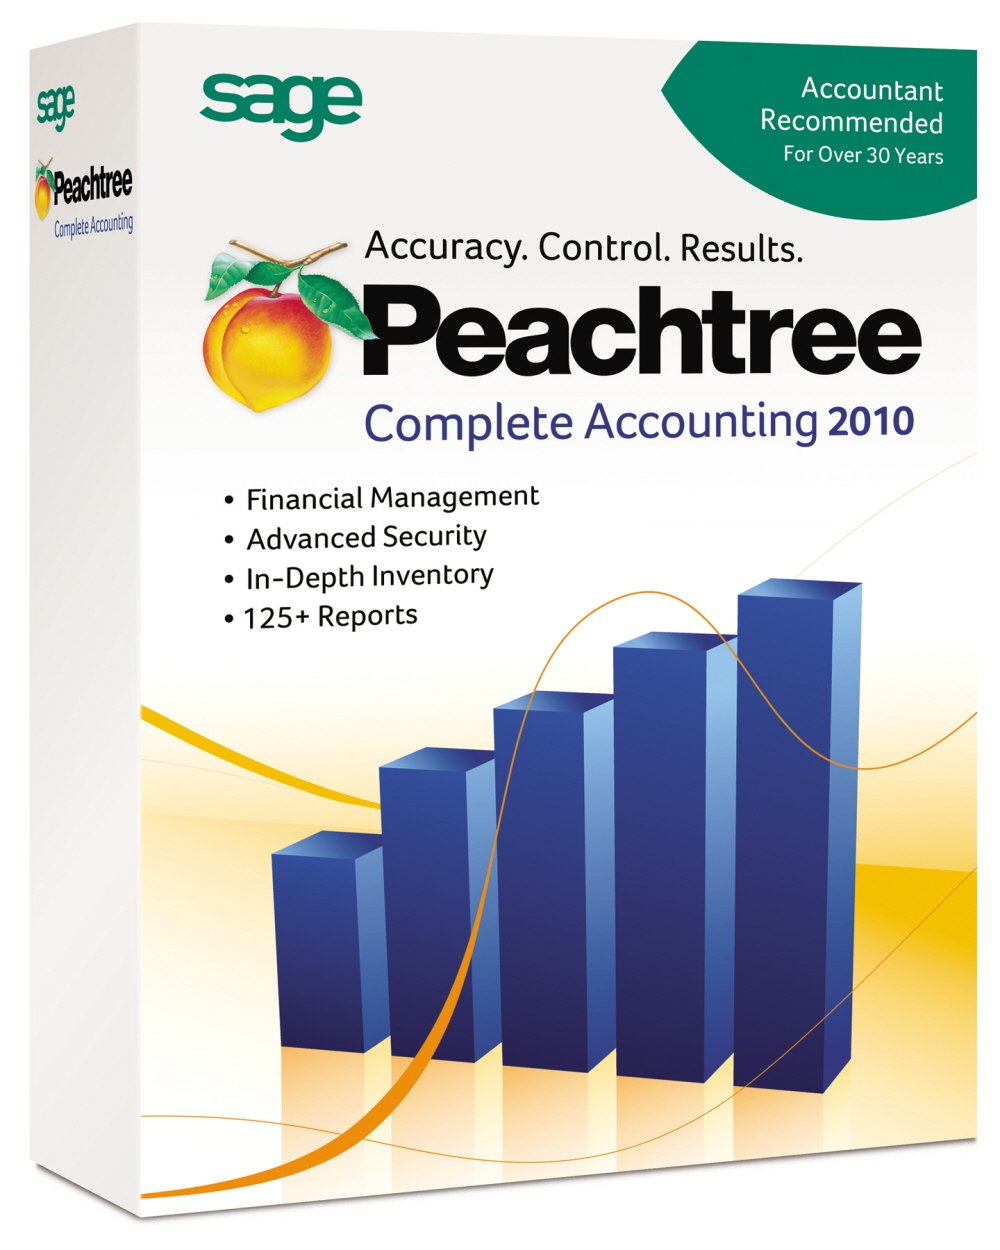 free trial peachtree accounting software